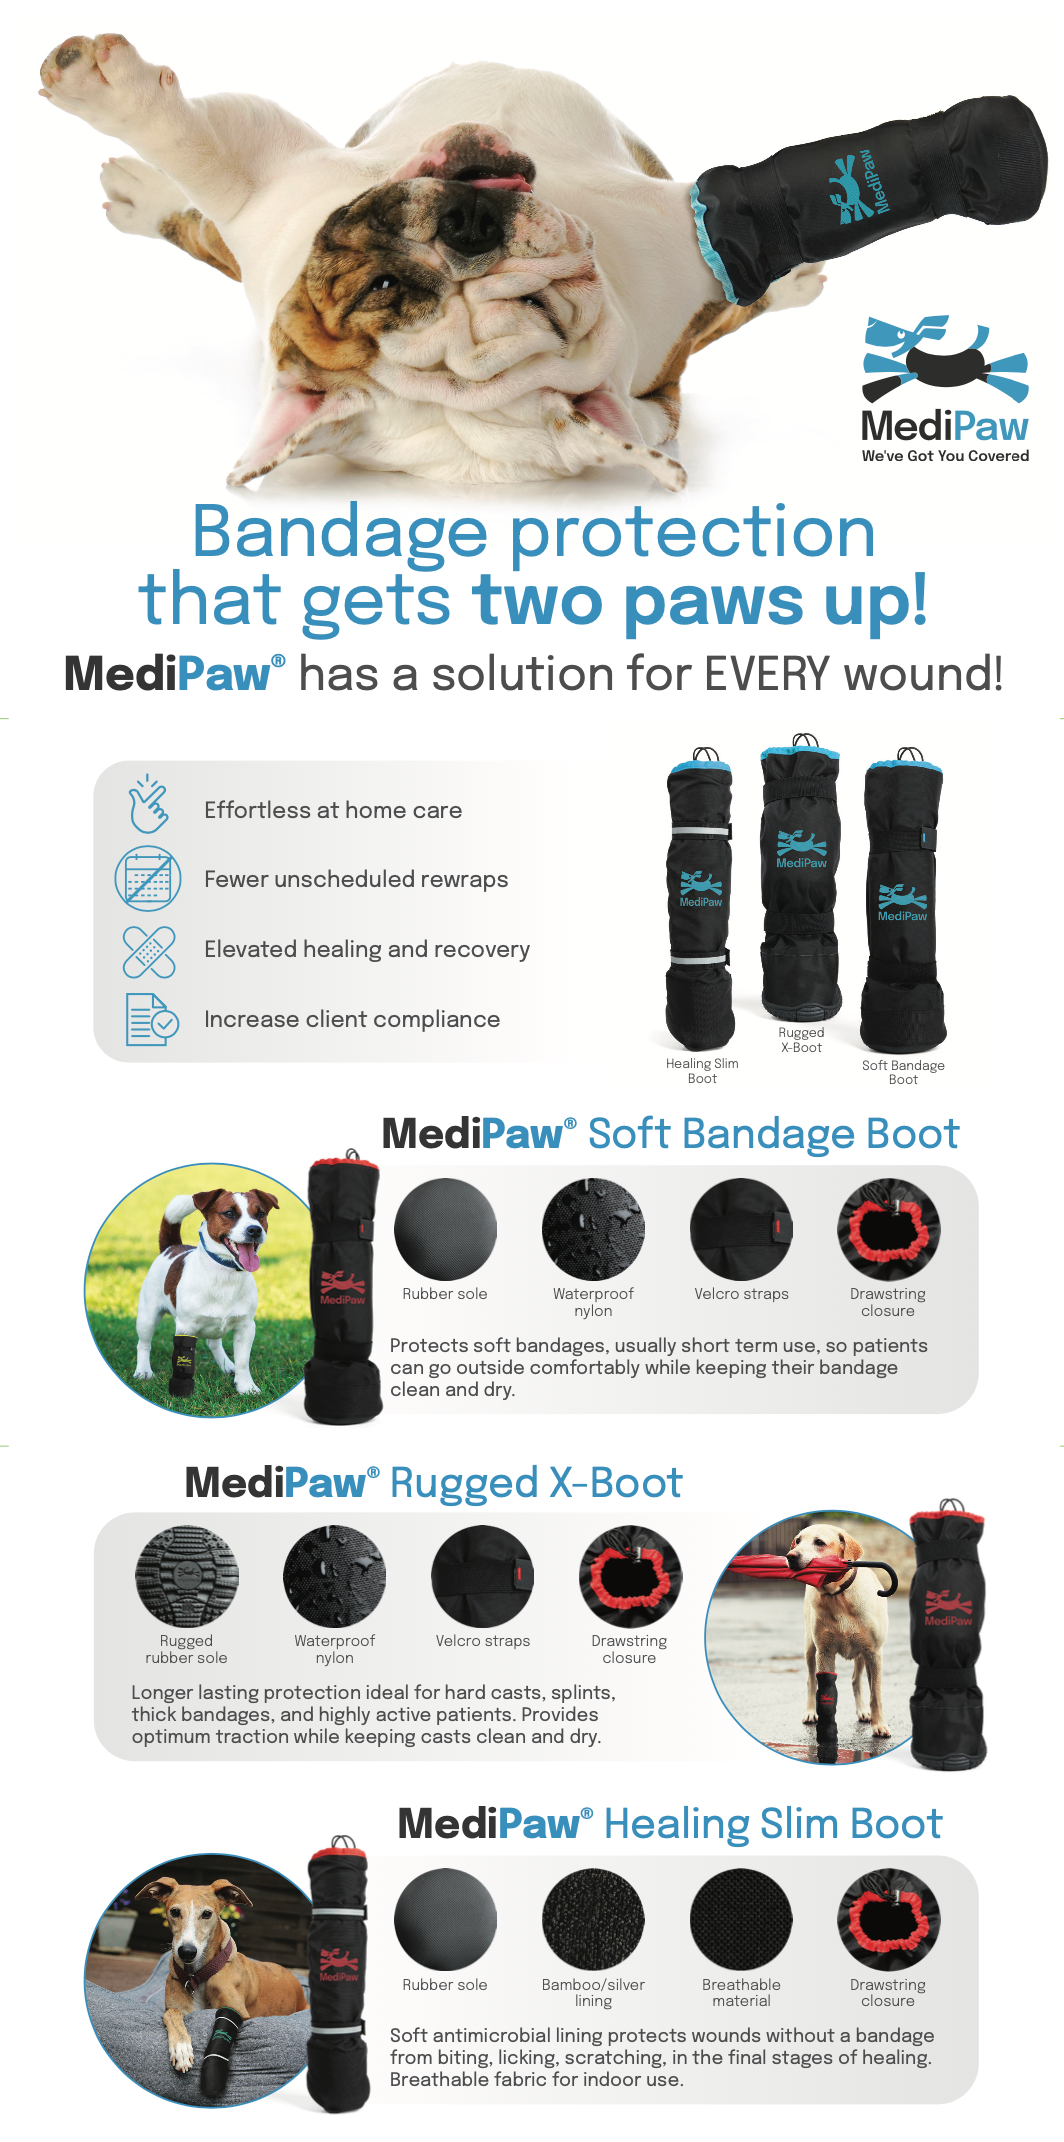 Your Whole Dog's MediPaw: Rugged X-Boot items provide bandage protection for dogs with boots in Australia.